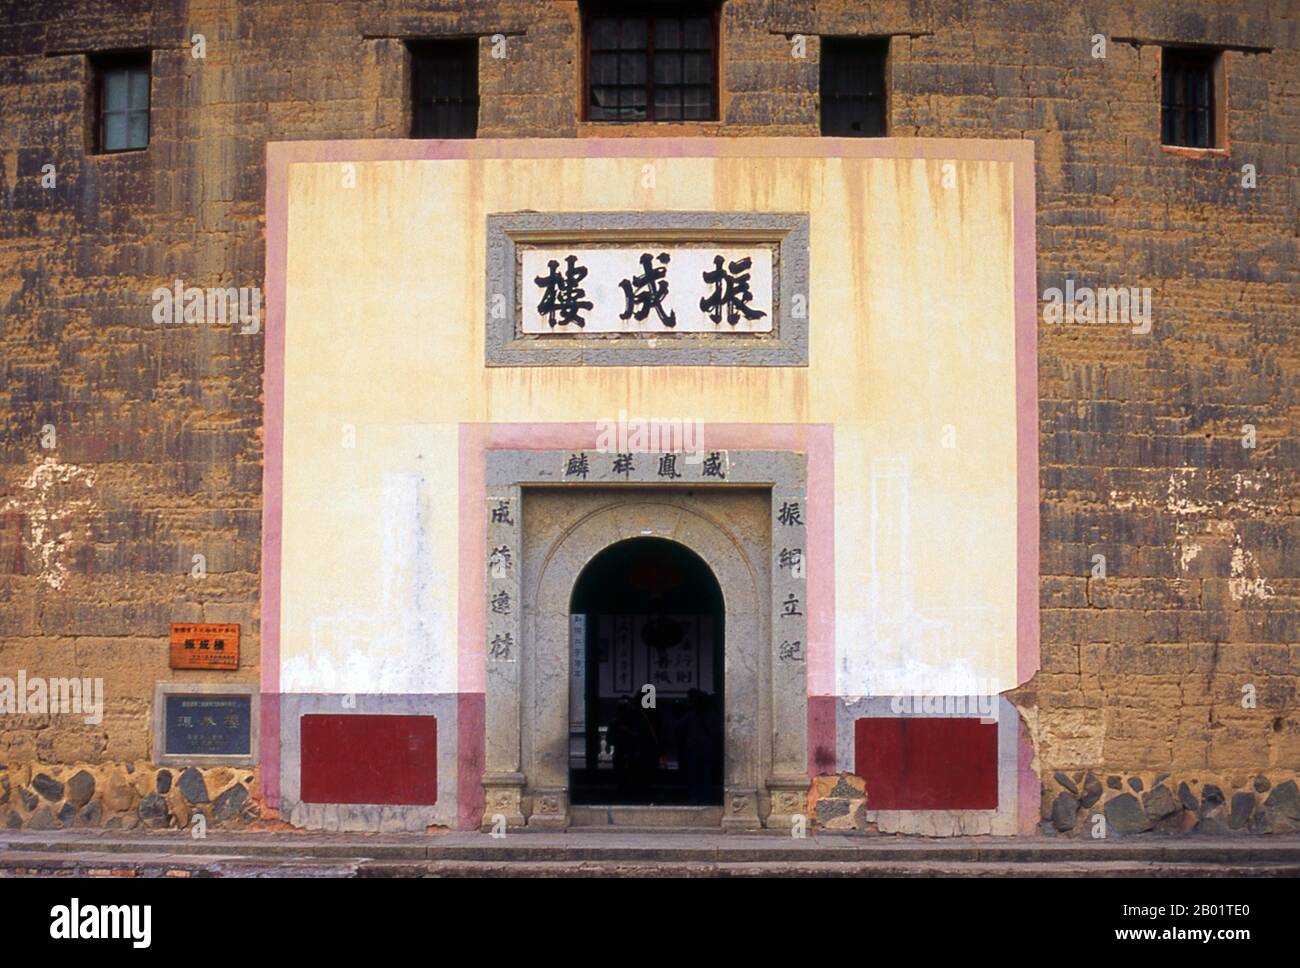 China: The only entrance into the Zhenchang Lou Hakka Tower near Hukeng, Yongding County, Fujian Province.  The Hakka (Kejia in Mandarin; literally 'guest people') are Han Chinese who speak the Hakka language. Their distinctive earthen houses or tulou can be found in the borderland counties where Guangdong, Jiangxi and Fujian provinces meet.  Communal entities, tulou are fortified against marauding bandits and generally made of compacted earth, bamboo, wood and stone. They contain many rooms on several storeys, so that several families can live together. Stock Photo